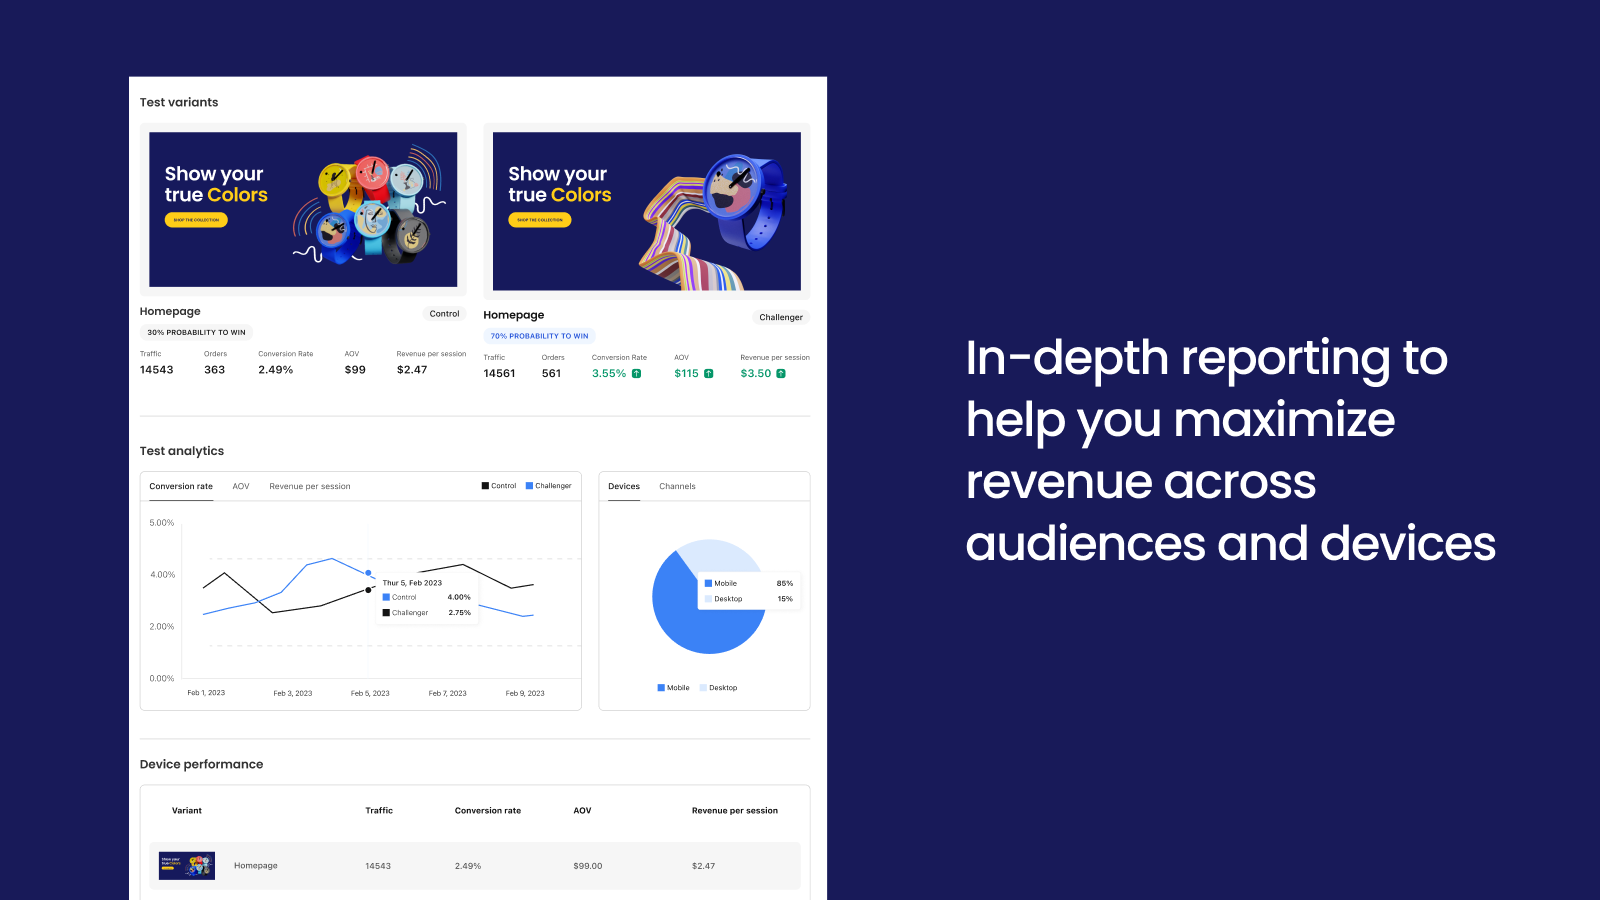 In-depth reporting to help you maximize revenue across audiences